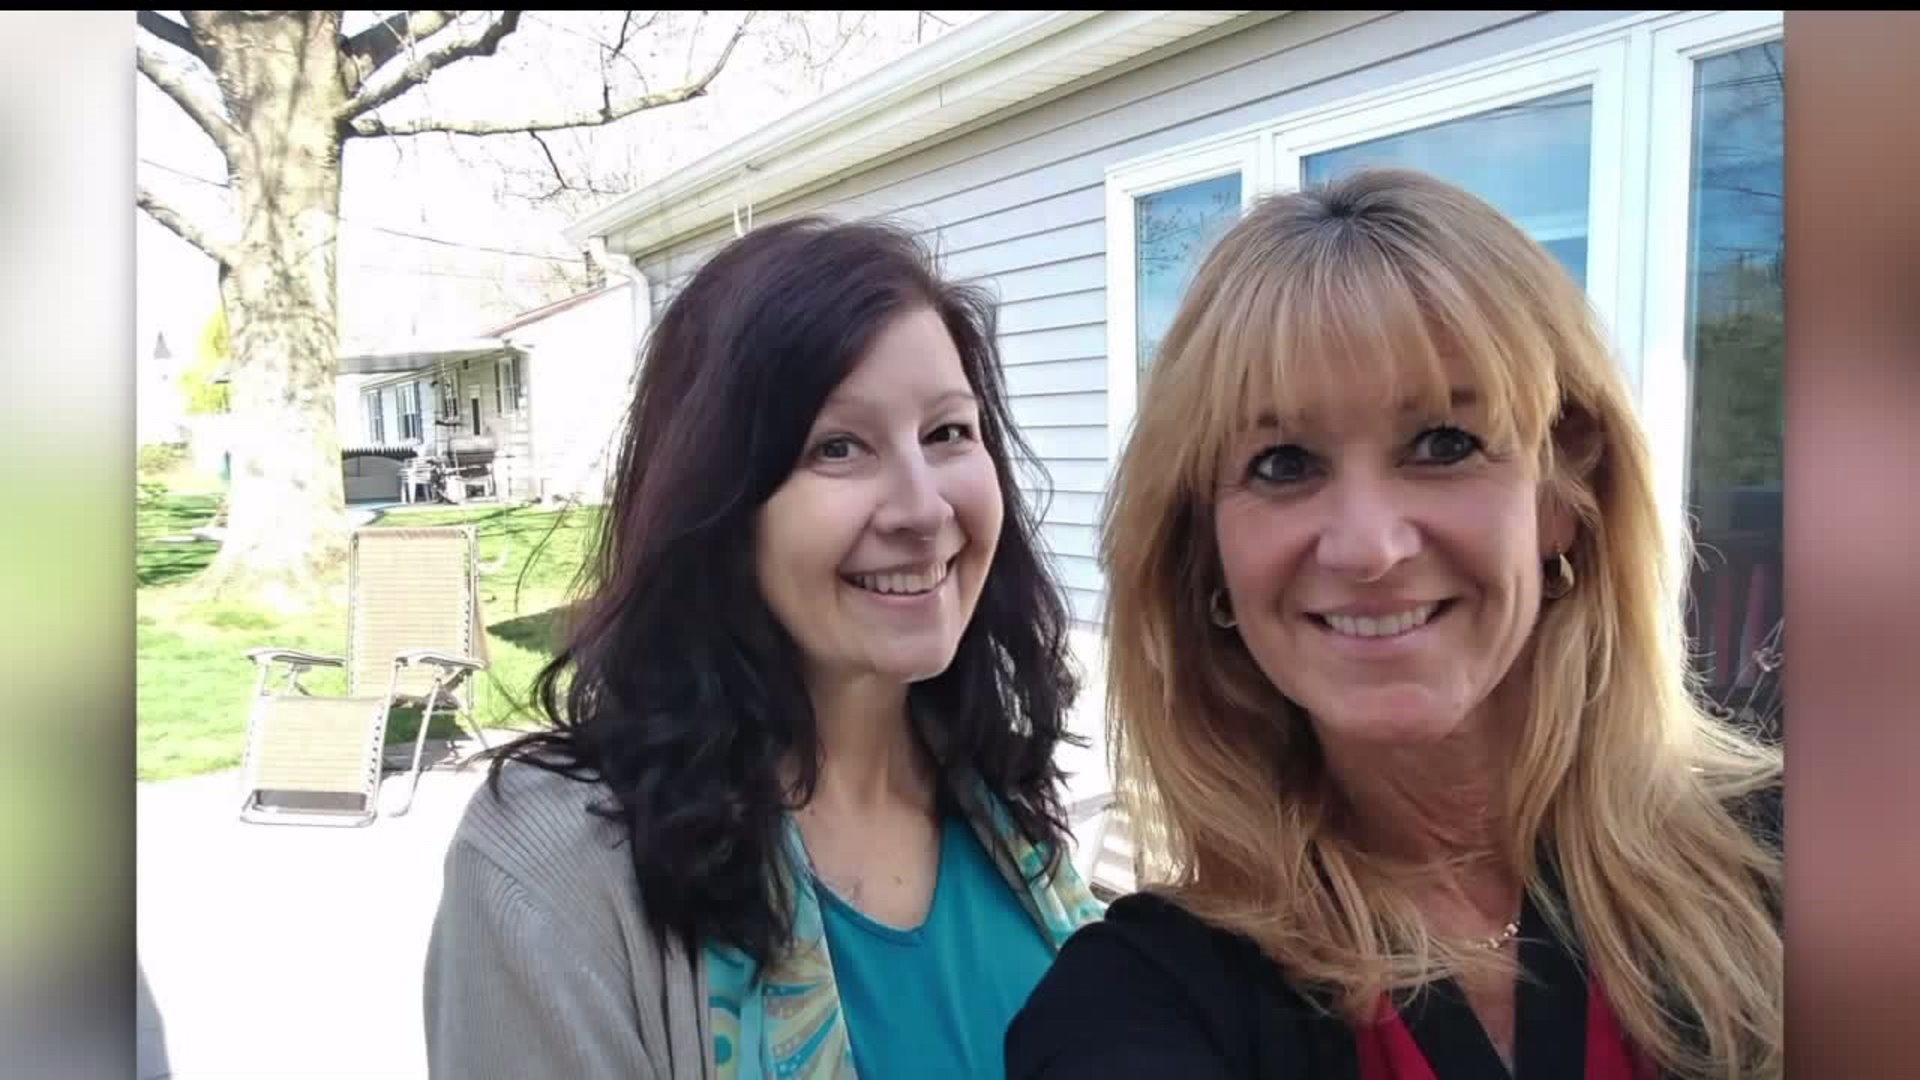 The power of friendship: woman helping friend find a kidney in Dauphin County